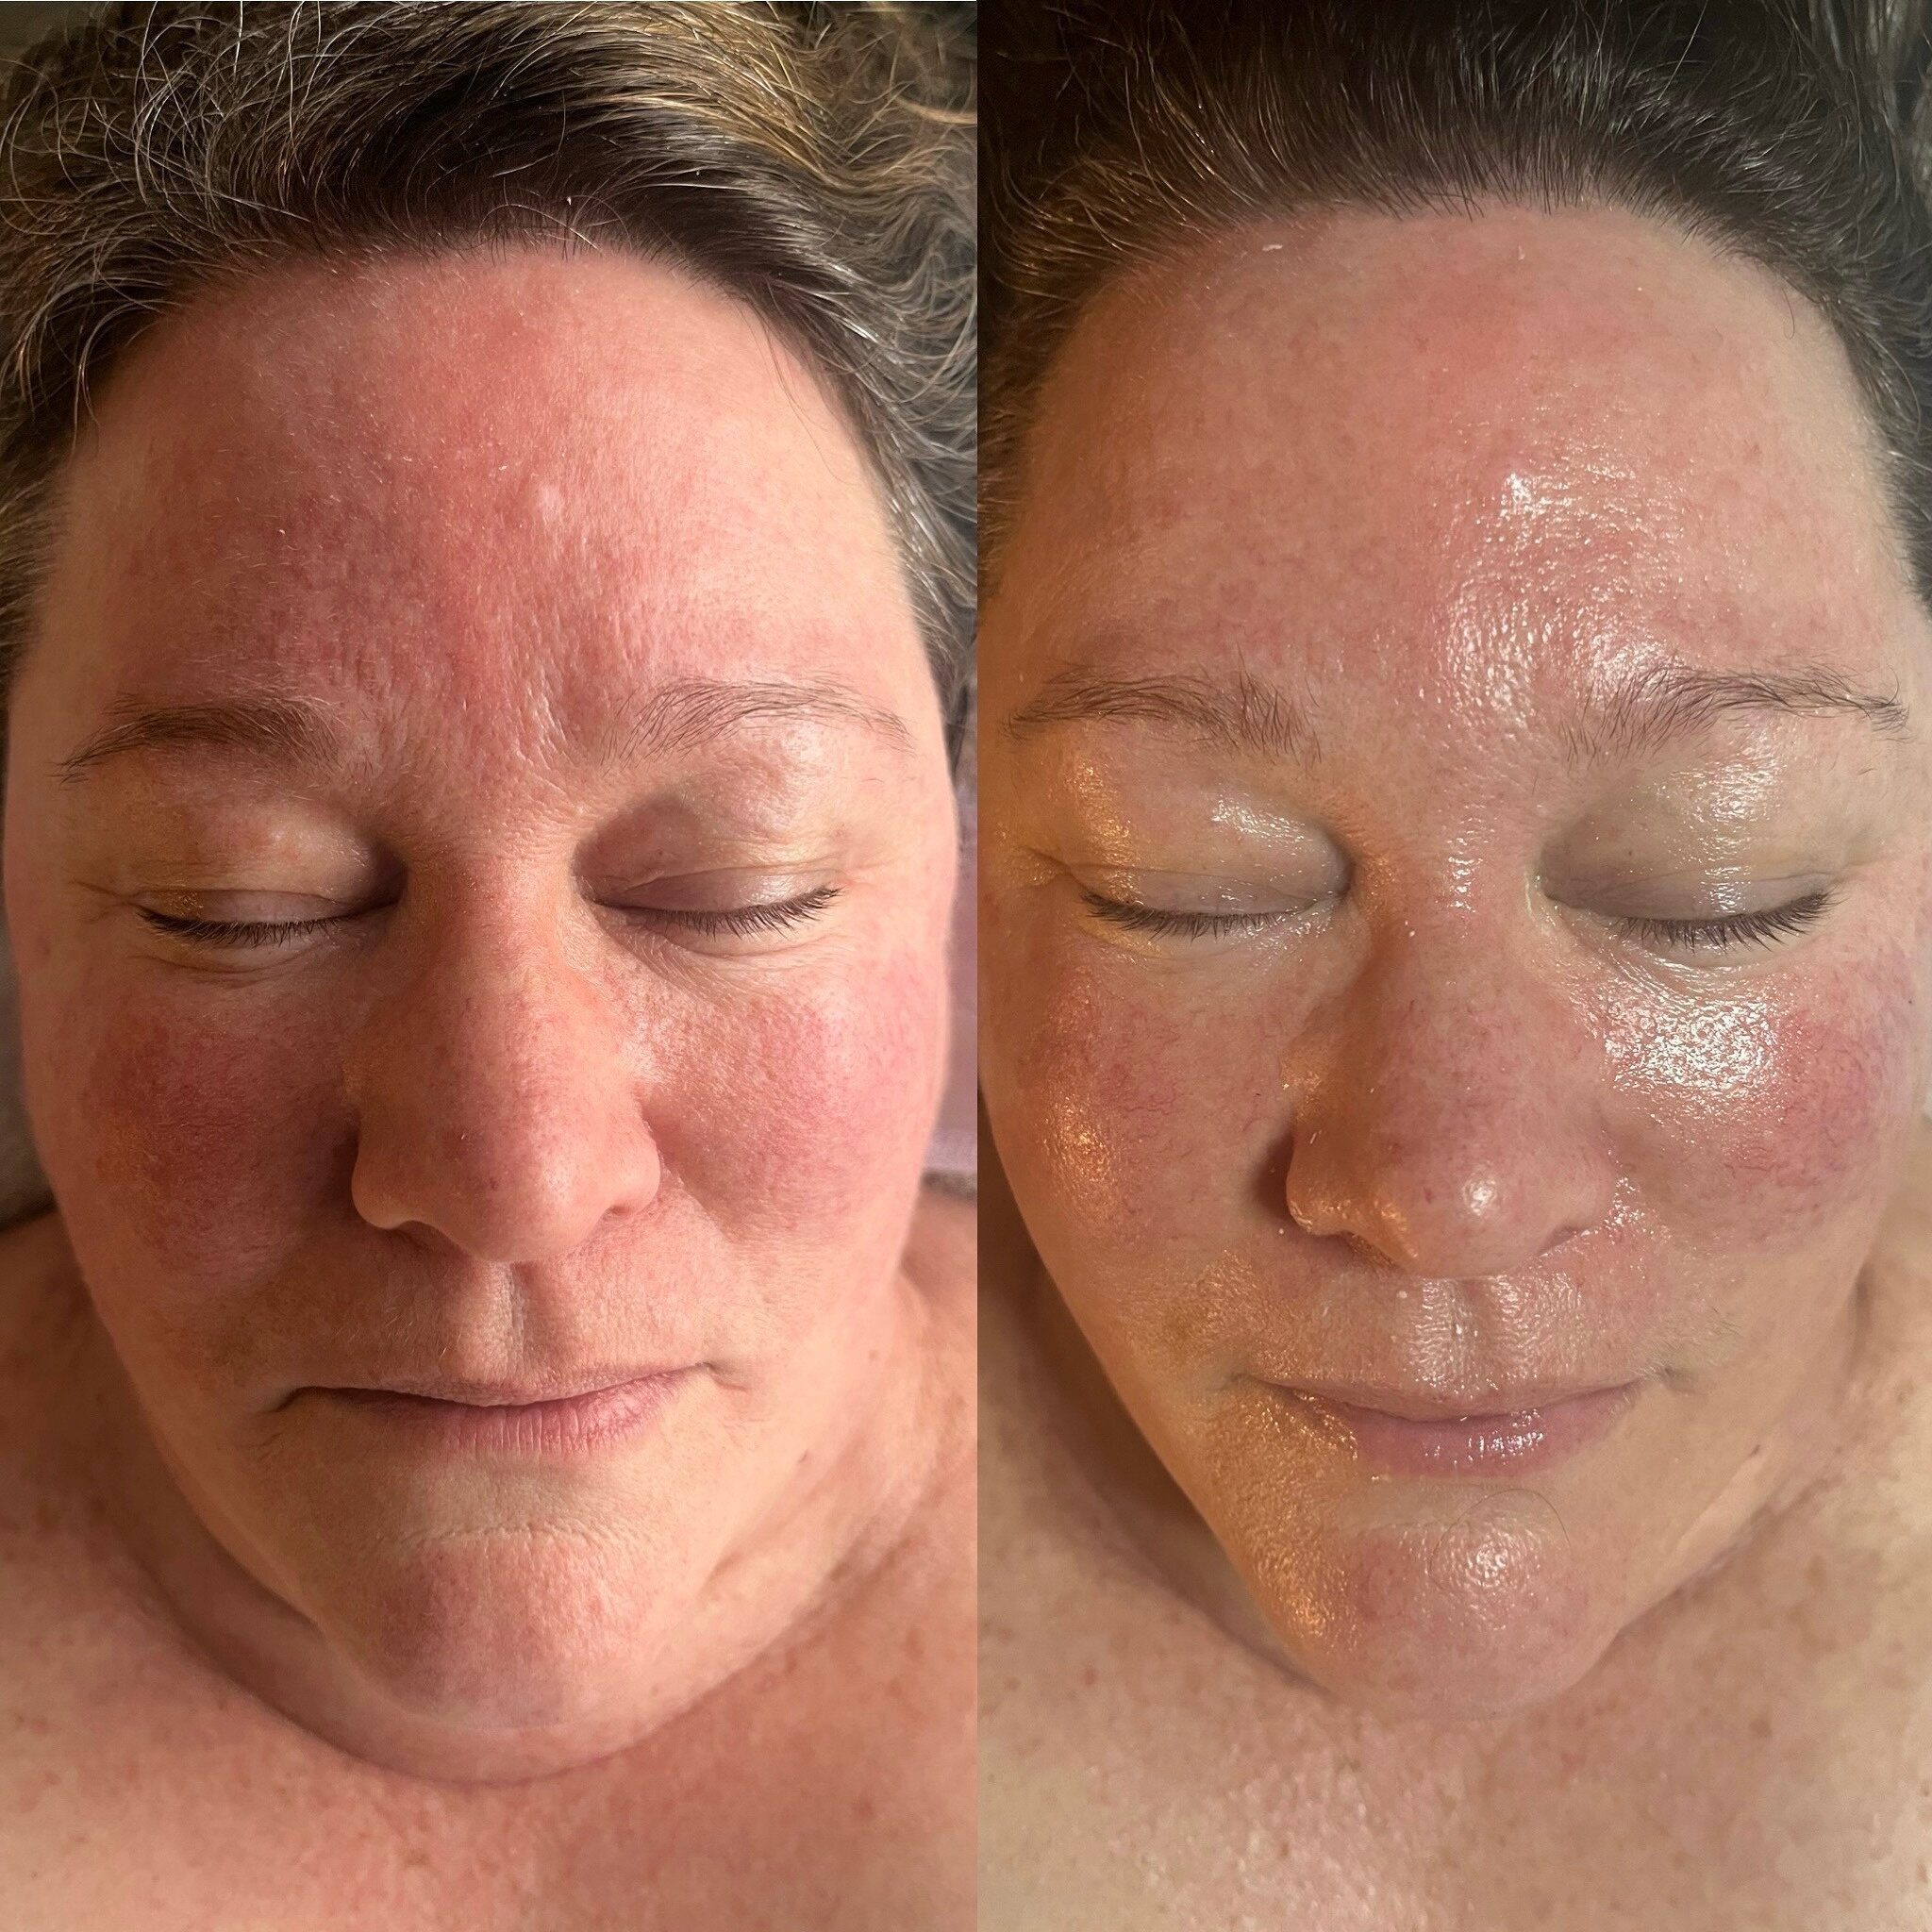 Look at these cheek bones come to life! First time client and we did Oxygen Therapy + LED  Light + Gua Sha. Our focus was to lessen the redness, sculpt and revitalize the skin. Consistency is always the key ingredient to happy and healthy skin. No fi